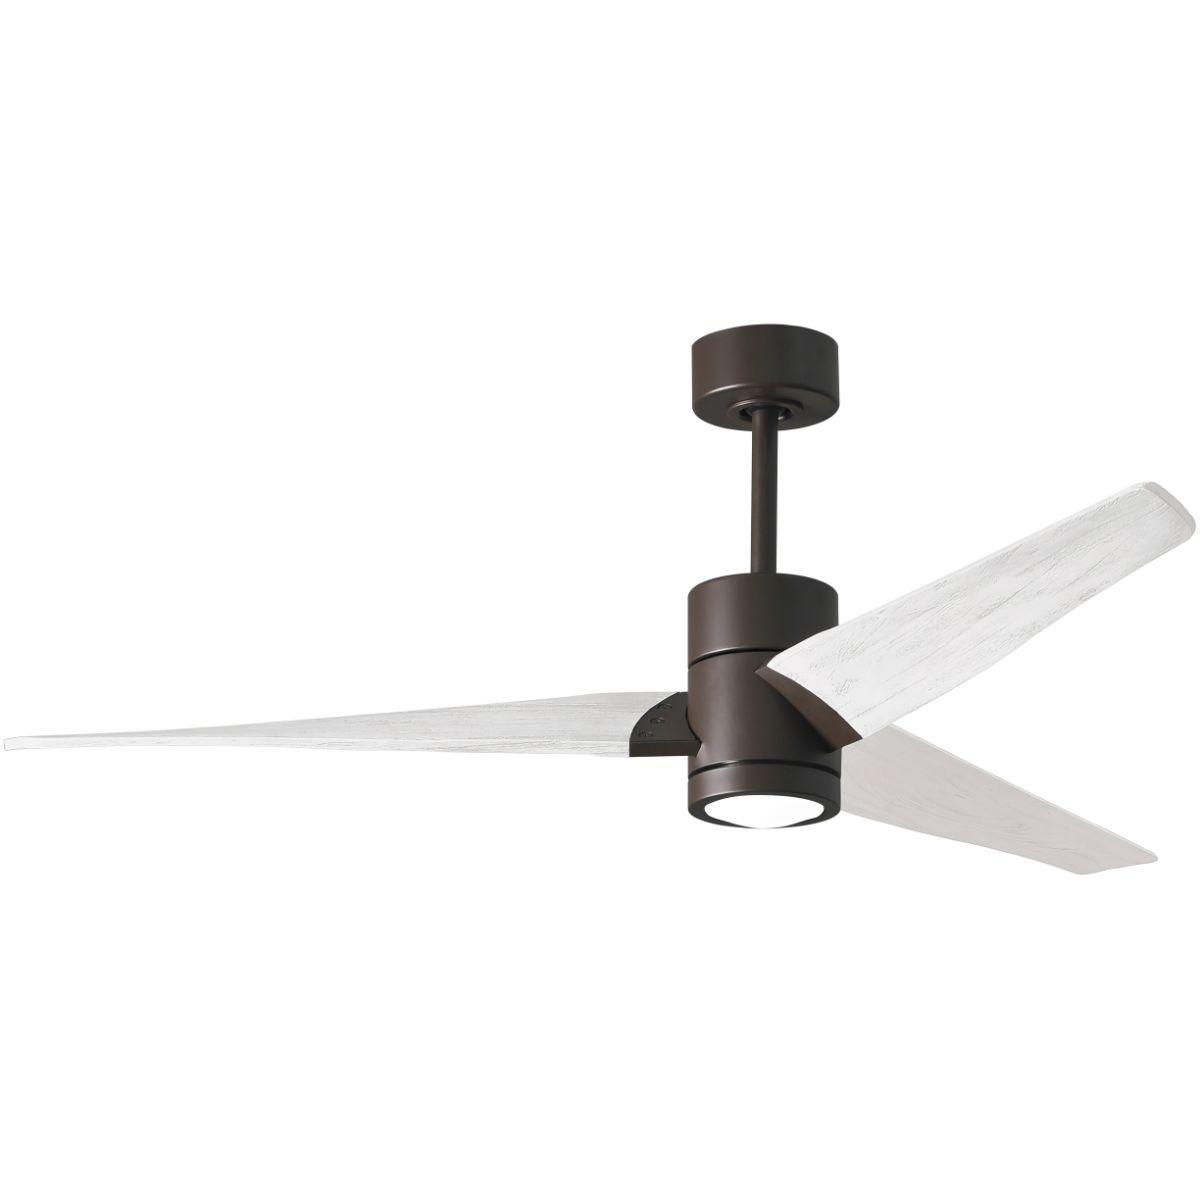 Super Janet 60 Inch Outdoor Ceiling Fan With Light, Wall And Remote Control Included - Bees Lighting